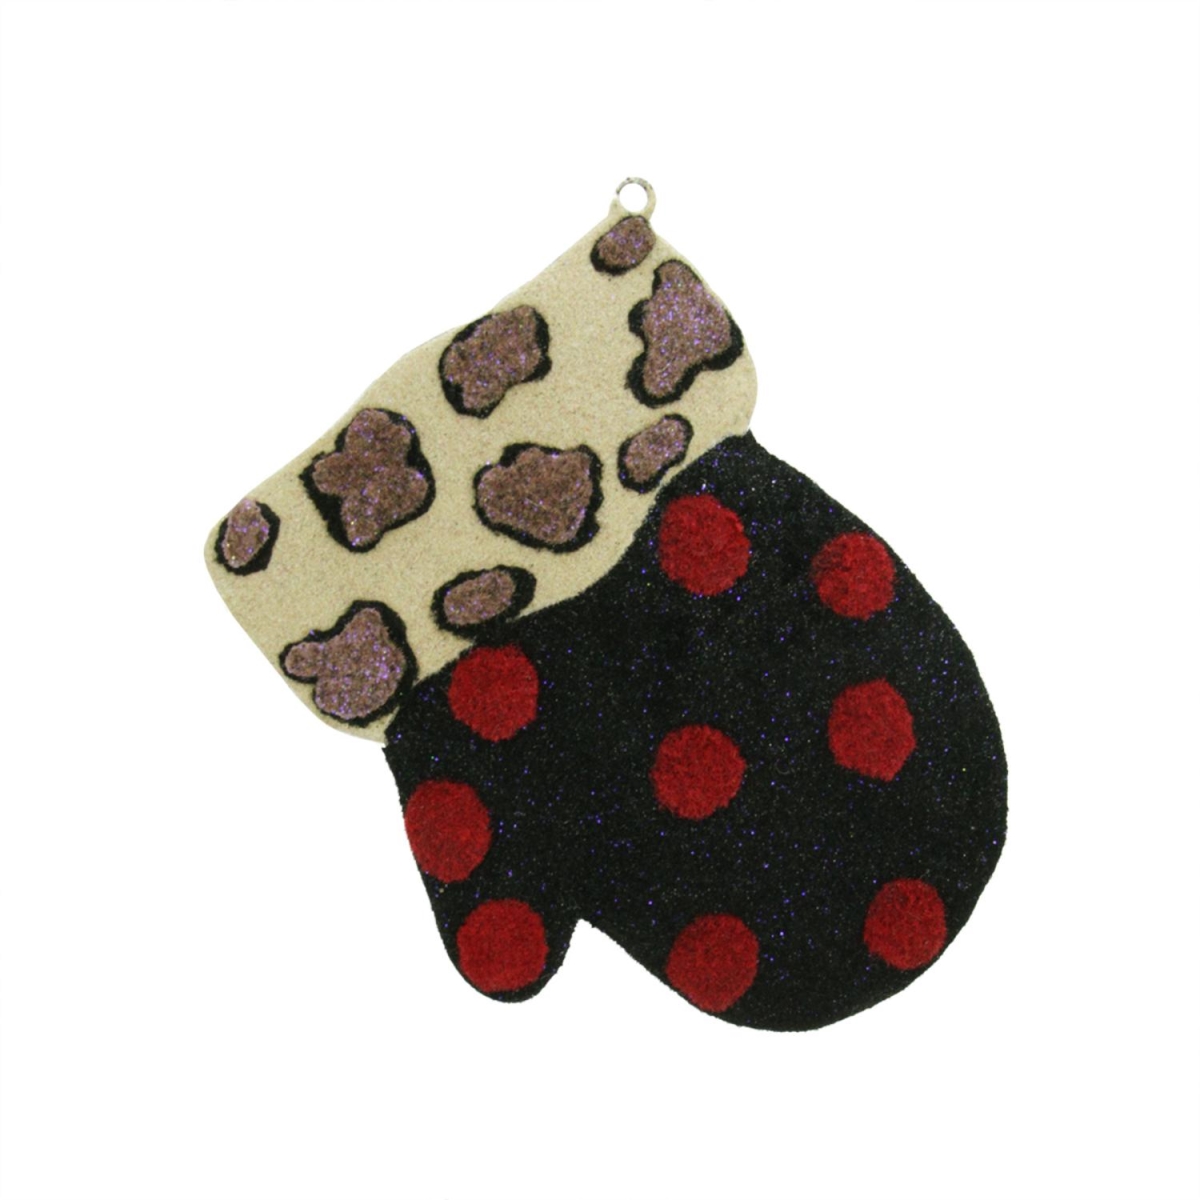 31452703 4 In. Eclectic Leopard Print & Polka Dot Mitten Christmas Ornament